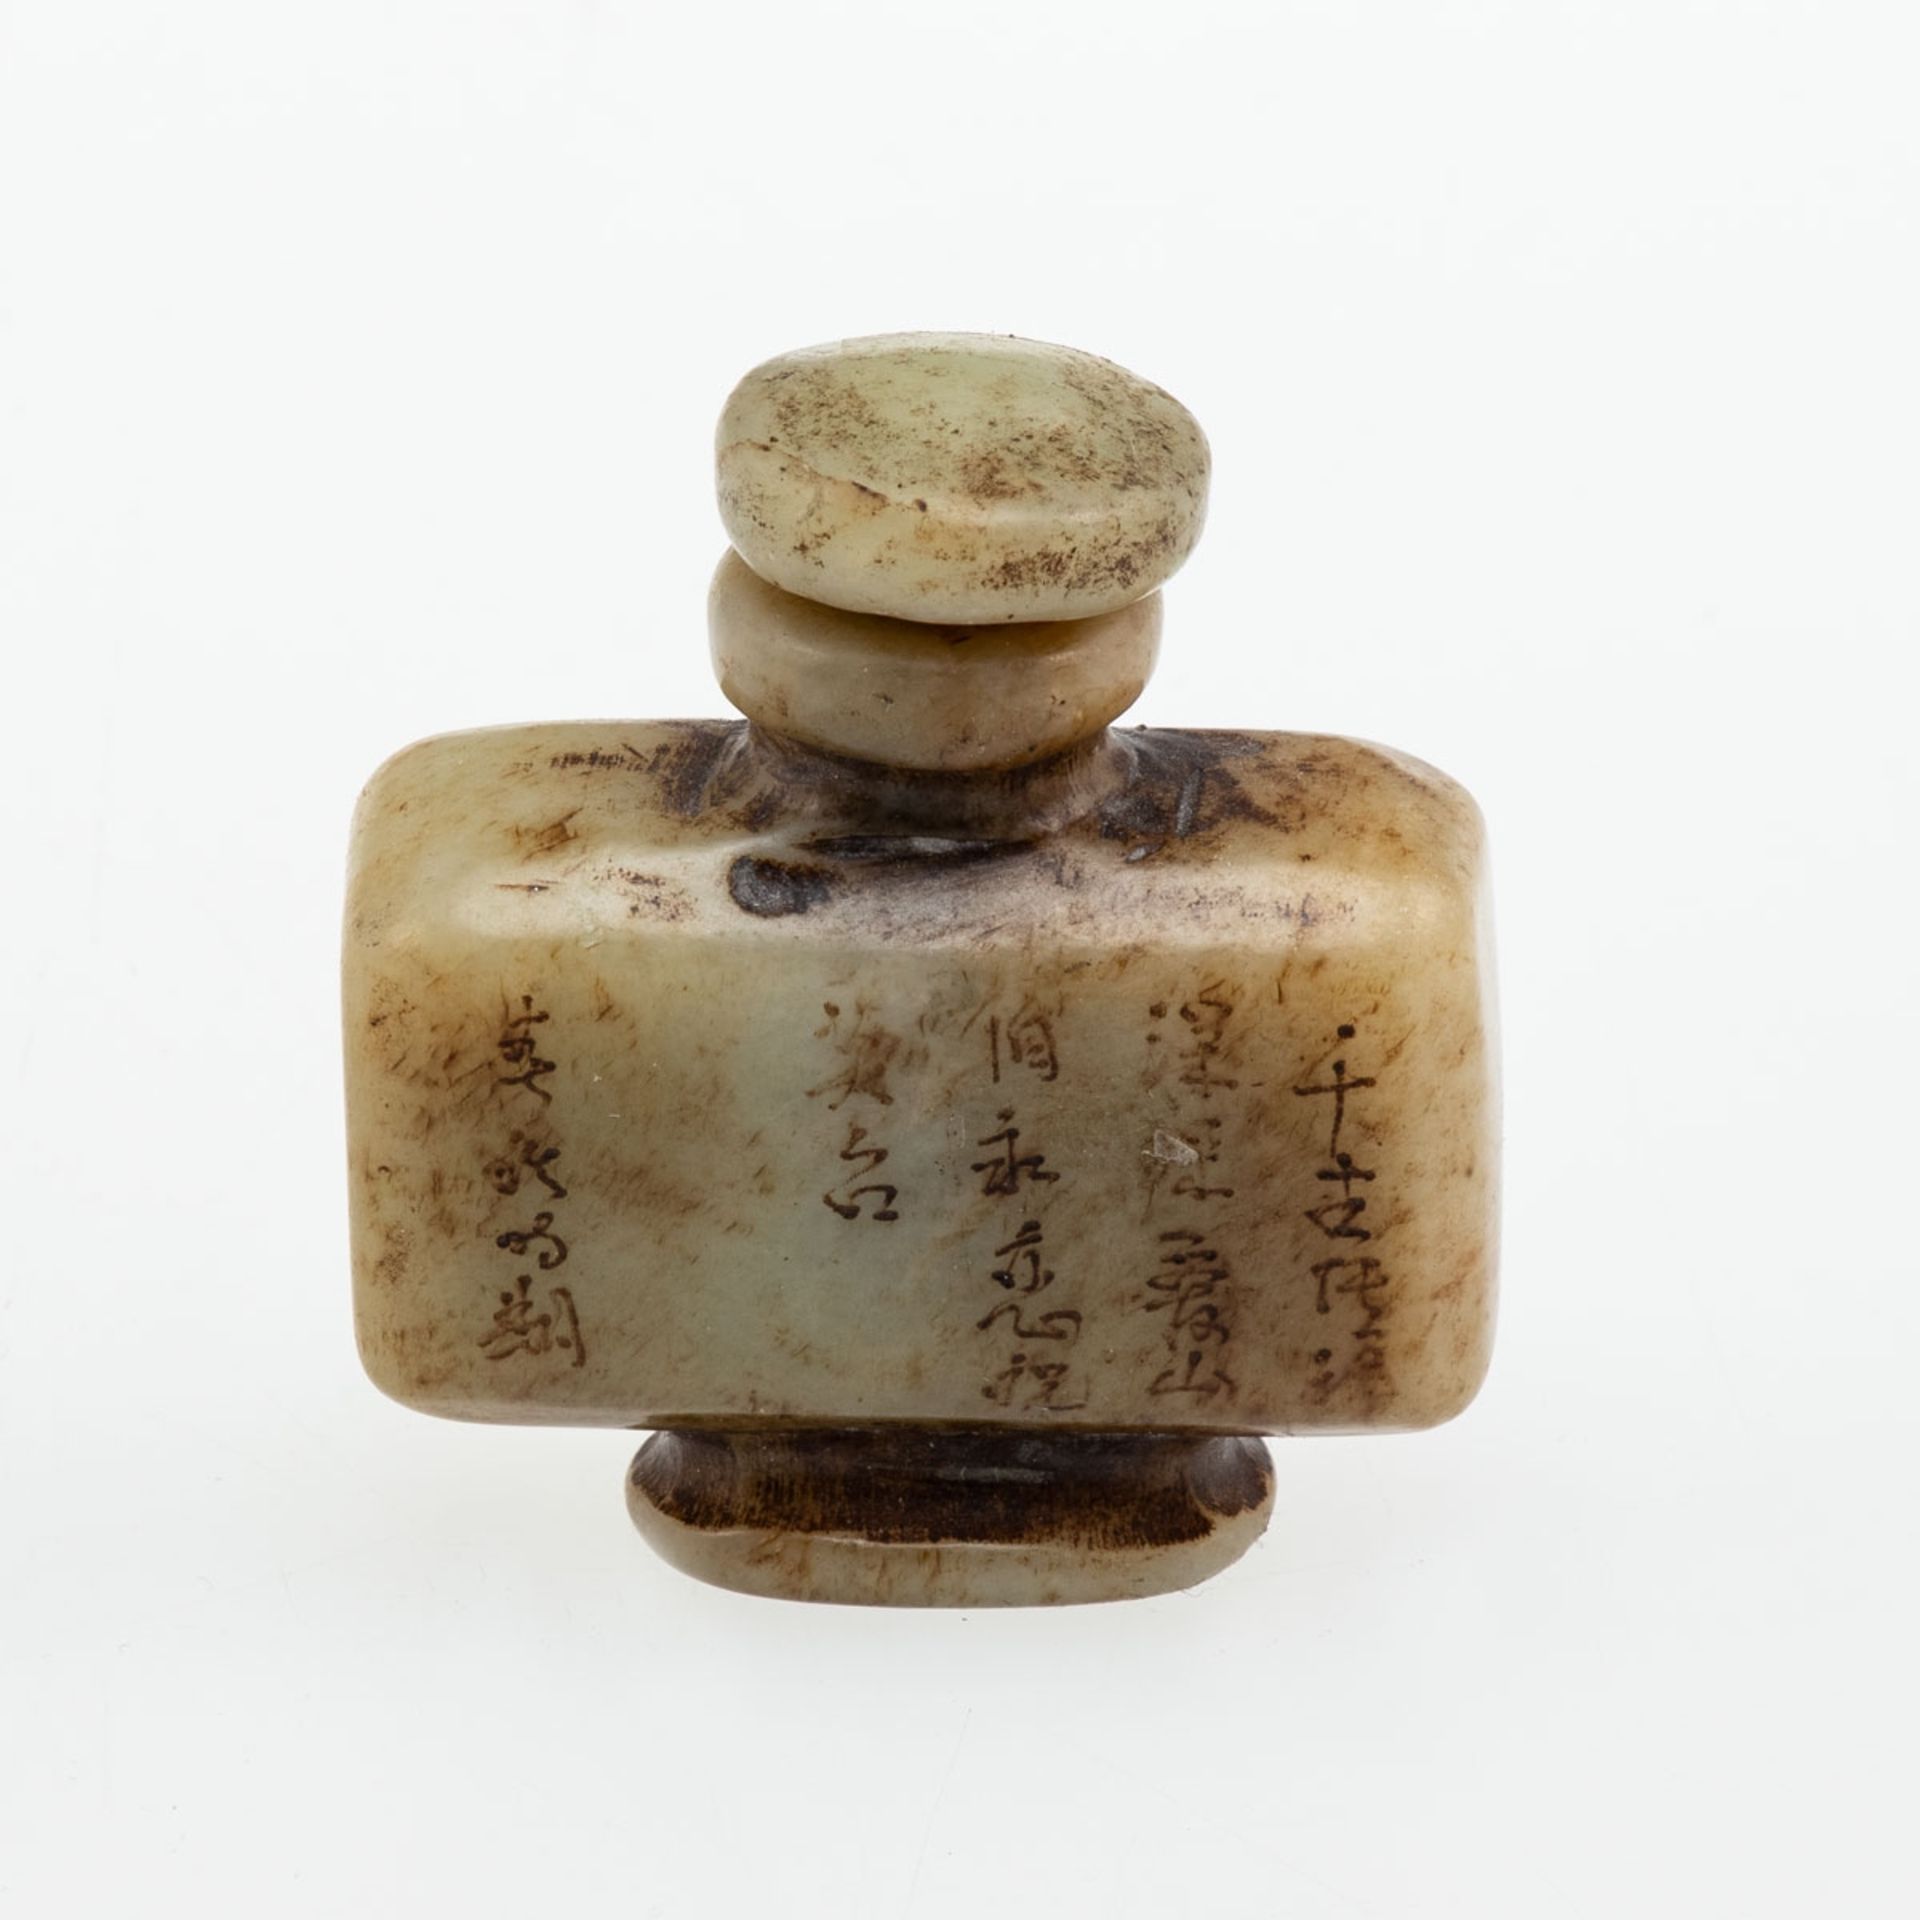 Snuffbottle, China, Qing-Dynastie - Image 2 of 2